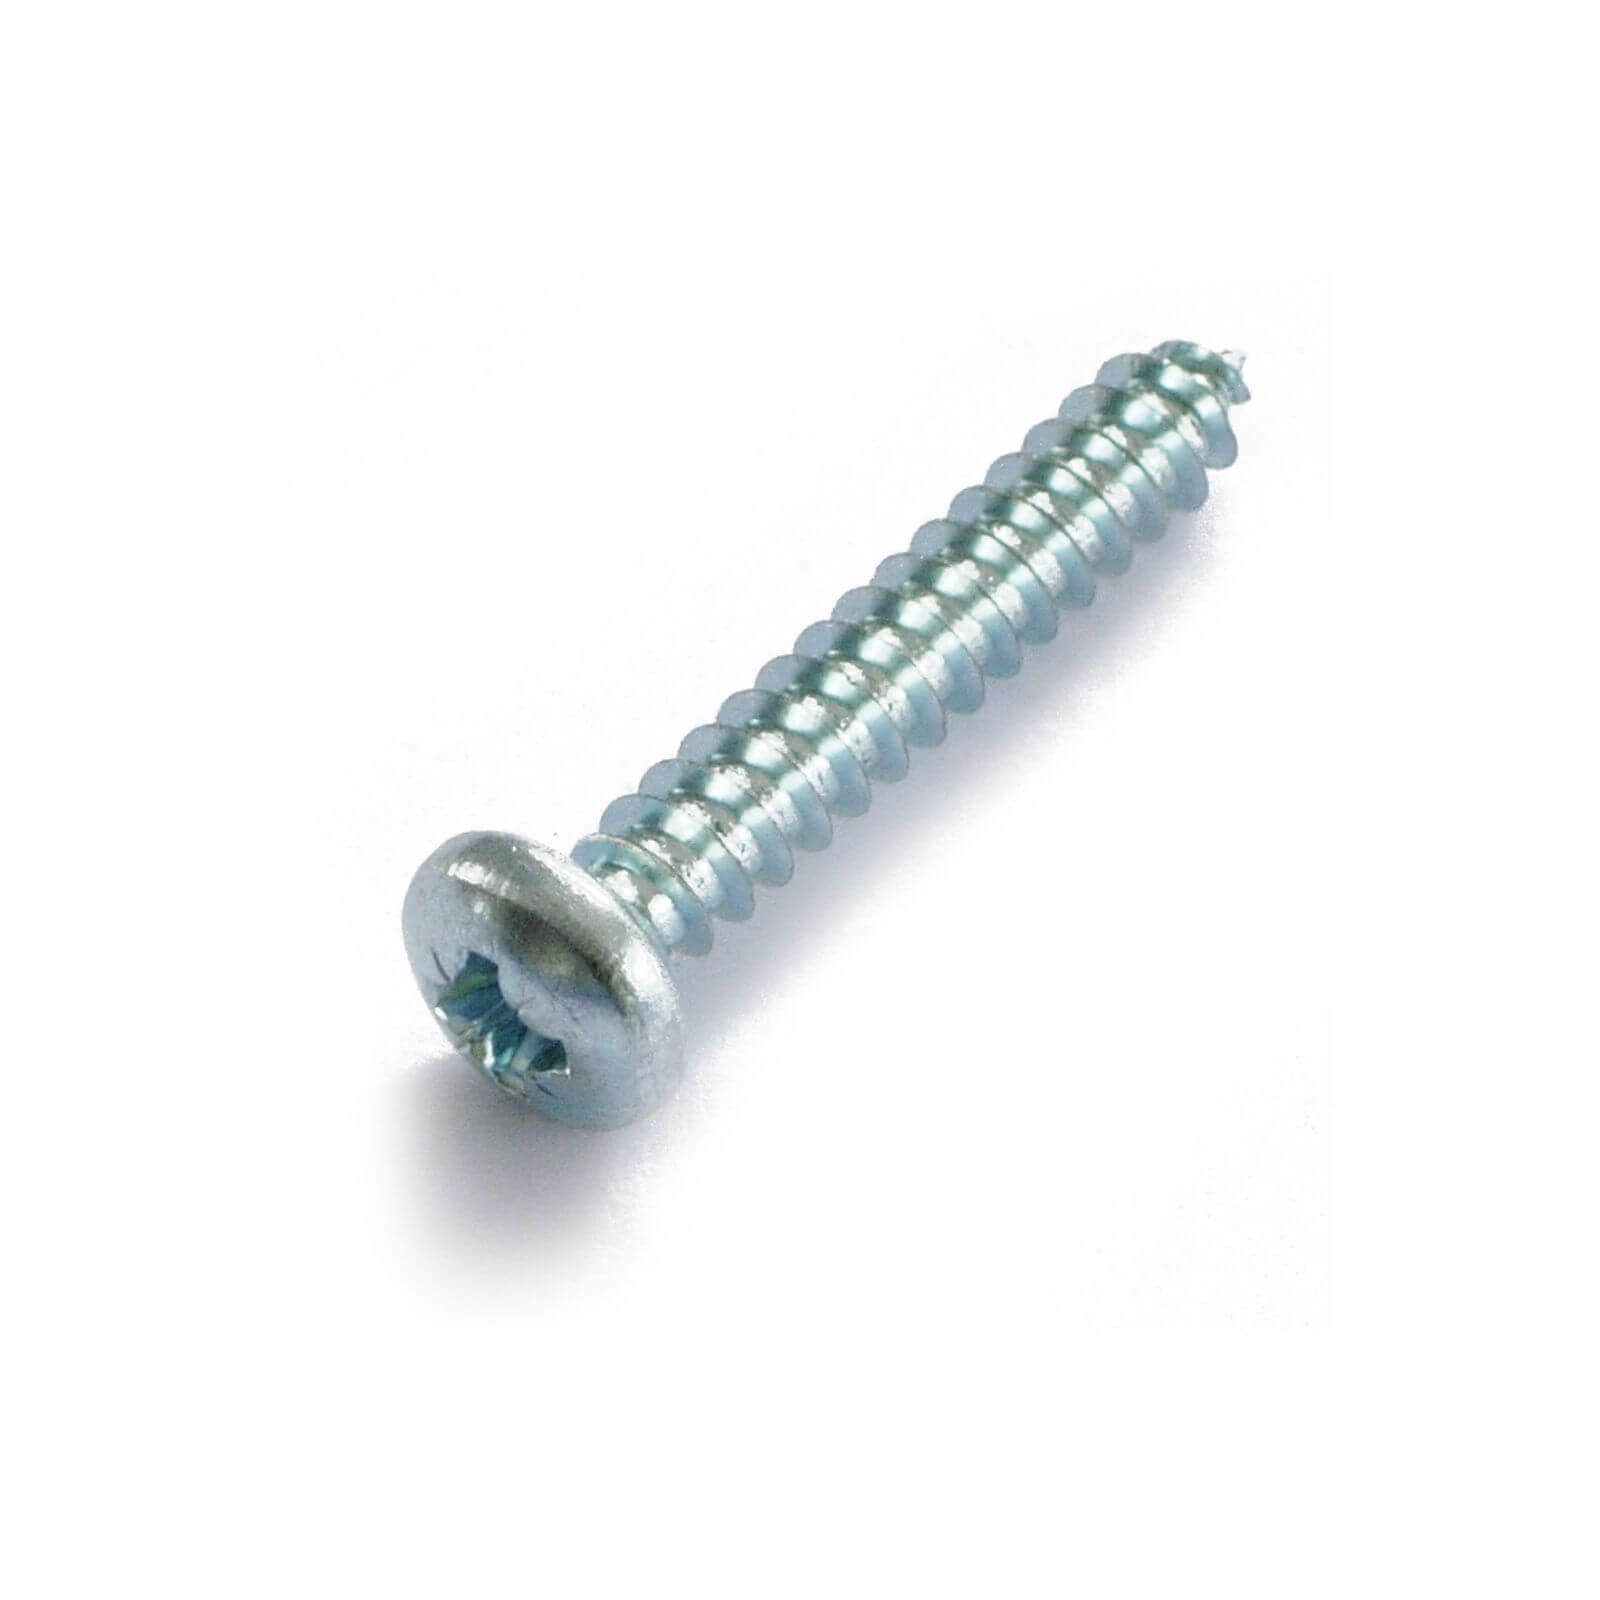 Self Tapping Screw - Bright Zinc Plated - 5 x 40mm - 10 Pack